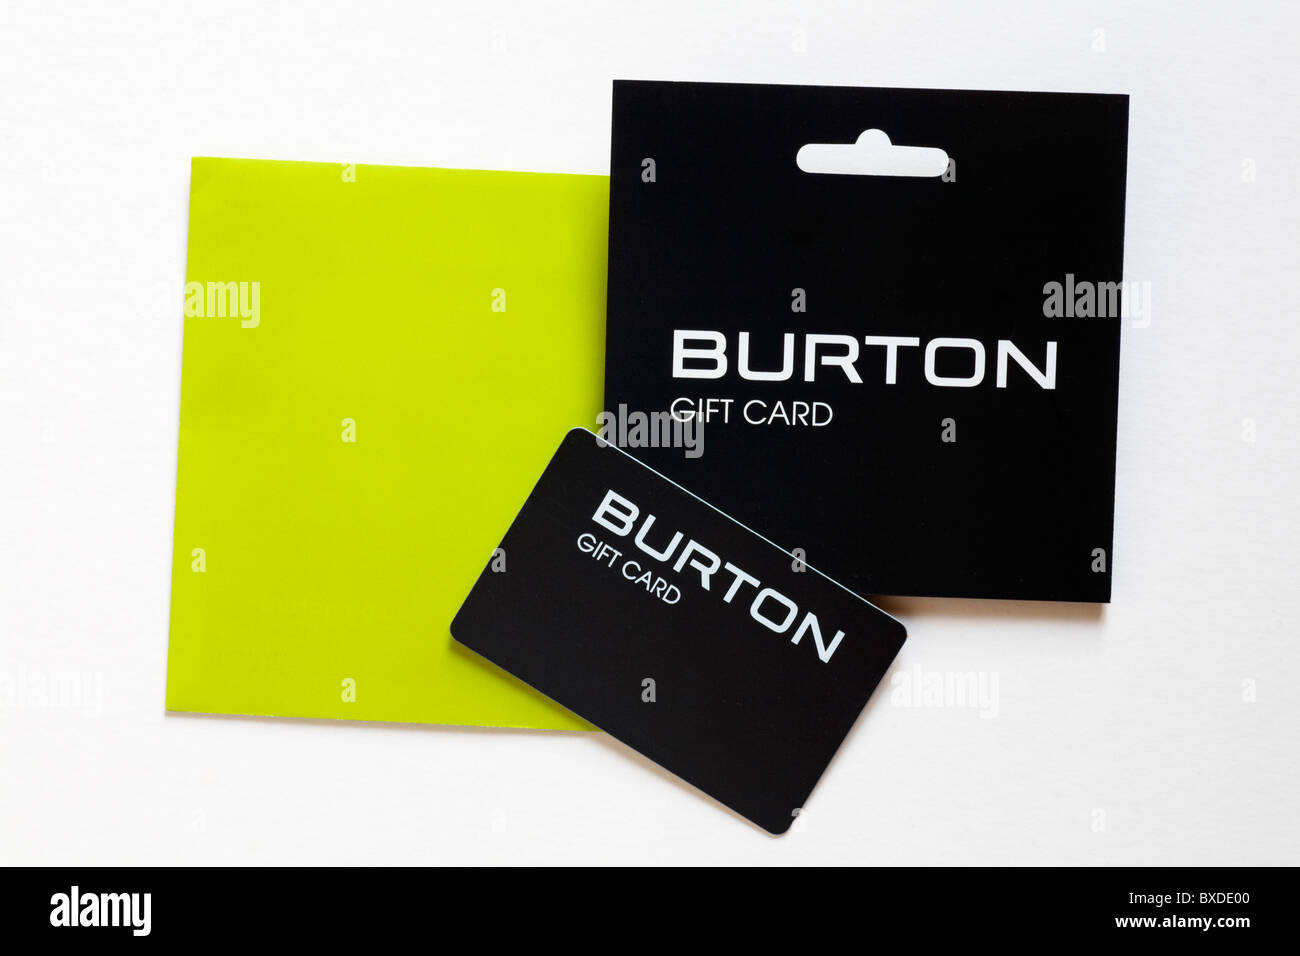 Burton gift card giftcard with lime green envelope isolated on white background Stock Photo